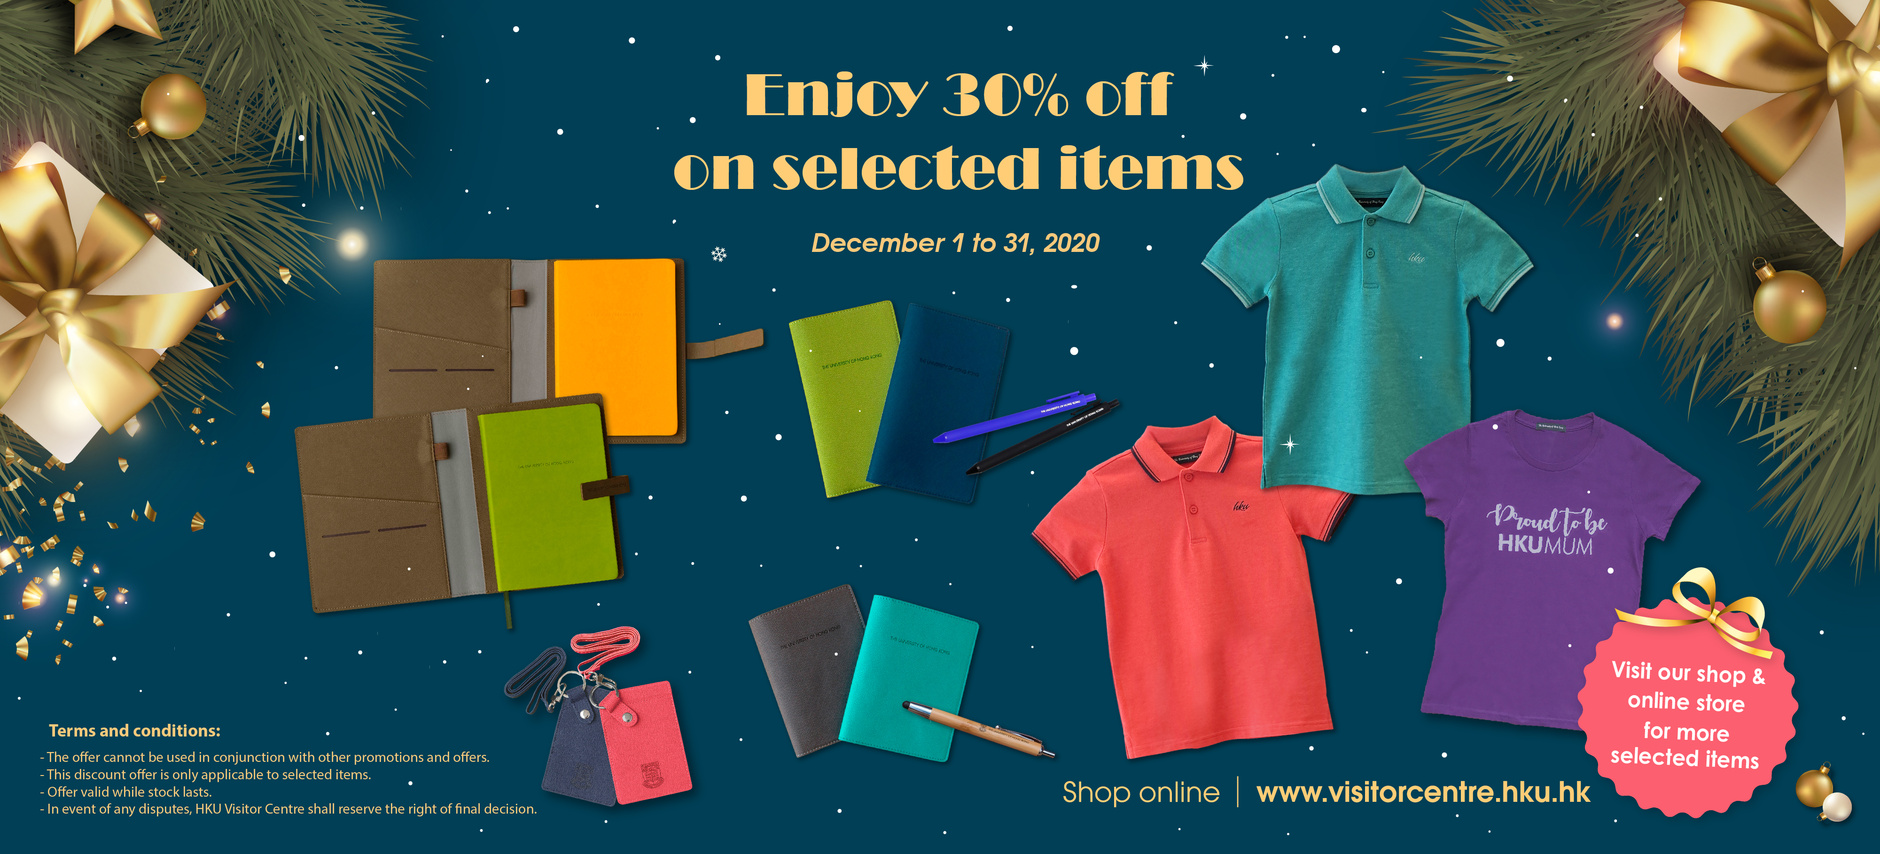 Enjoy 30% off on selected items